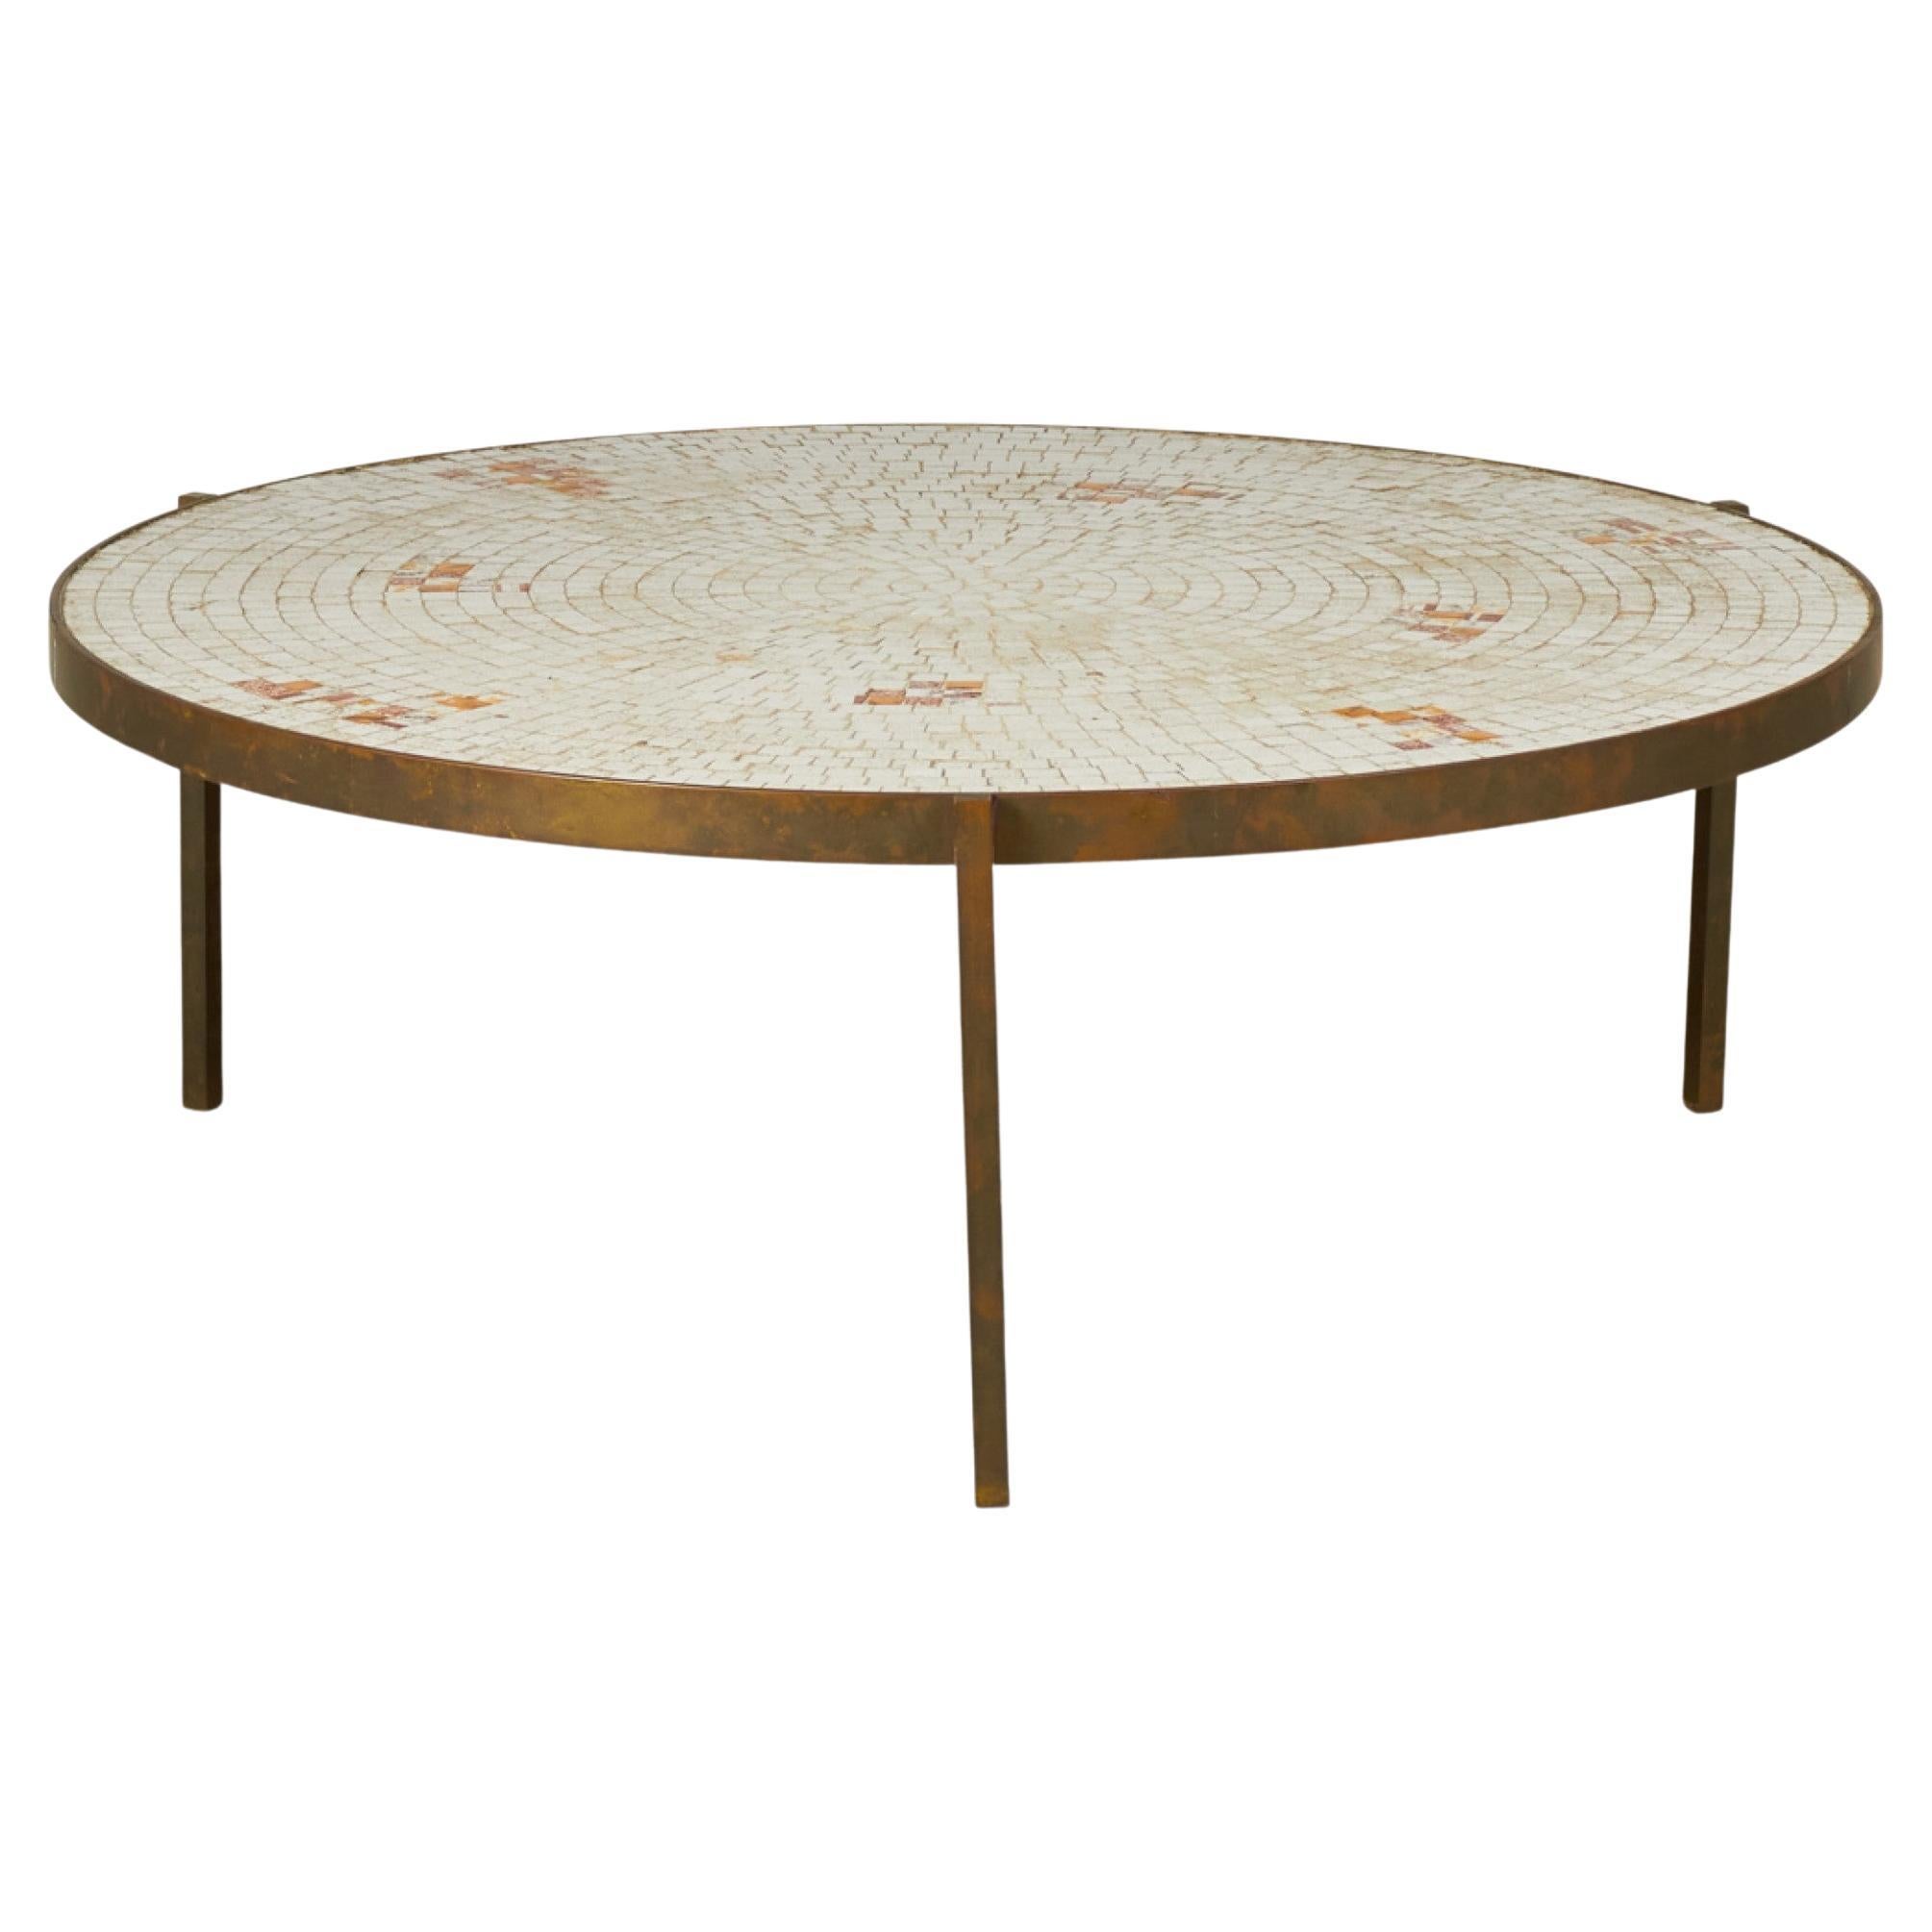 Beige and Orange Mosaic Tile Top Circular Coffee Table For Sale